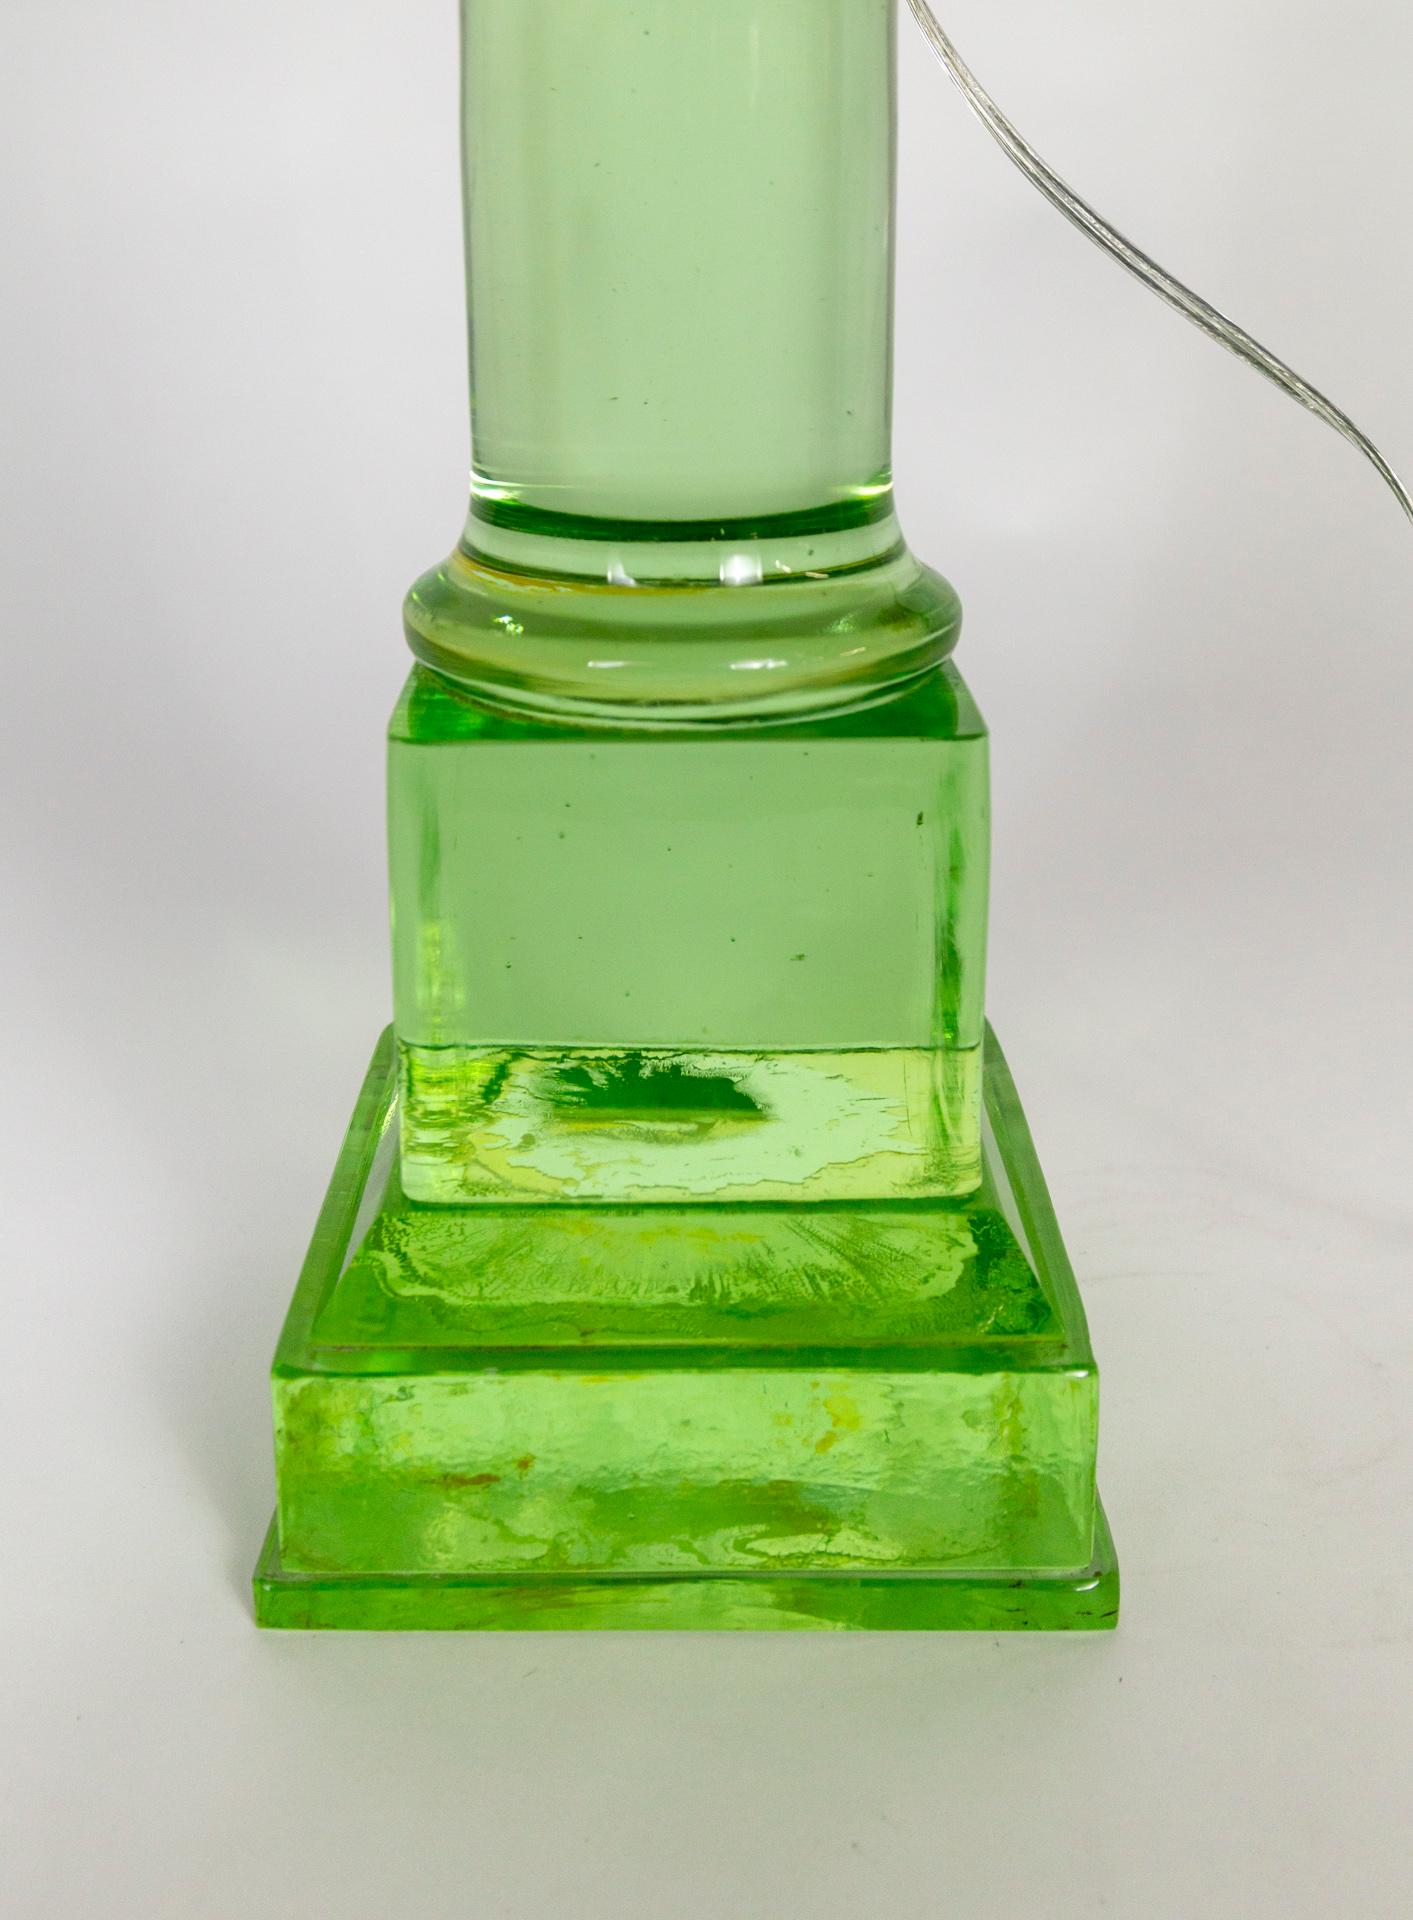 A striking column in translucent, green glass that is French wired as a lamp. It takes on different looks depending on what is behind it and on what ground it sits; shifting color and value. It's comprised of stacked, molded pieces. New brass